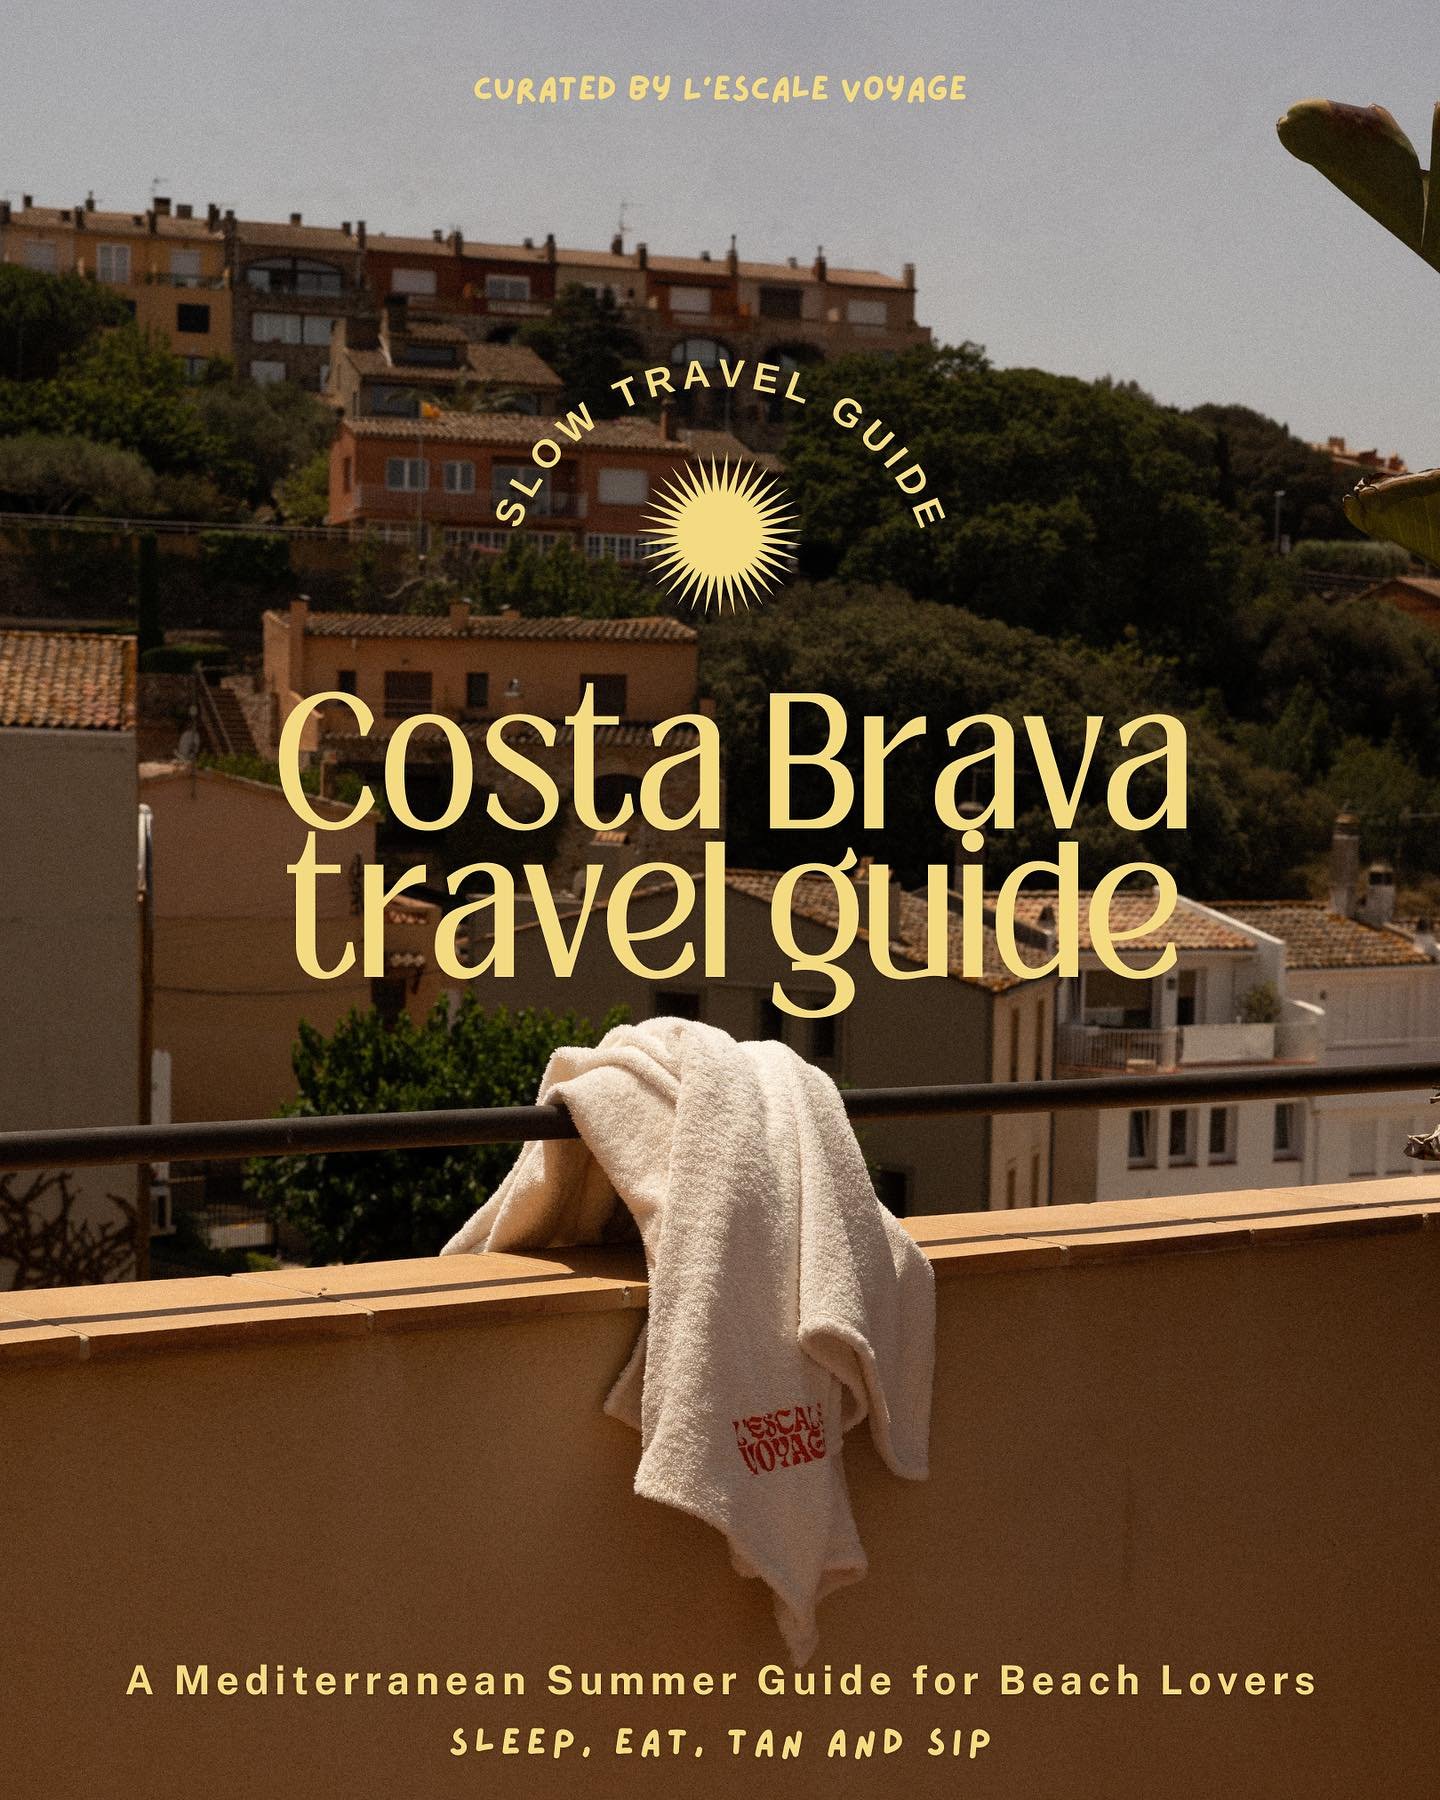 NEW DOWNLOADABLE TRAVEL GUIDE ✨ 

Welcome to Costa Brava! 🇪🇸

Creating this guide took some time as we deliberated over the direction to take. However, it&rsquo;s finally here, just in time for you to plan your trip to Costa Brava. 

This guide is 